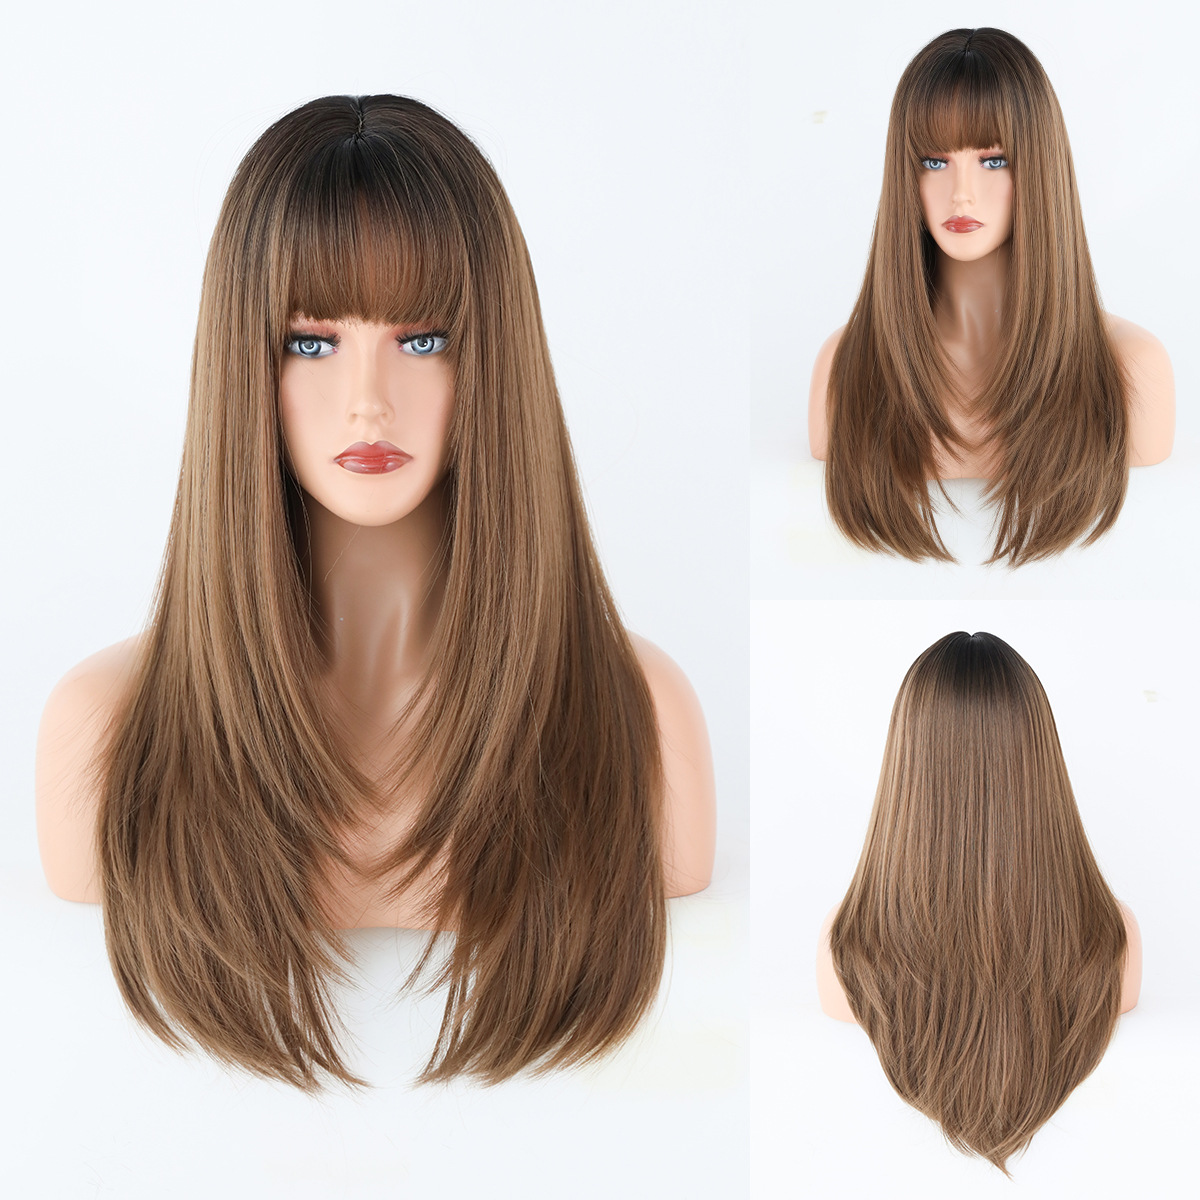 A fashionable synthetic wig featuring multicolor straight hair and trendy air bangs